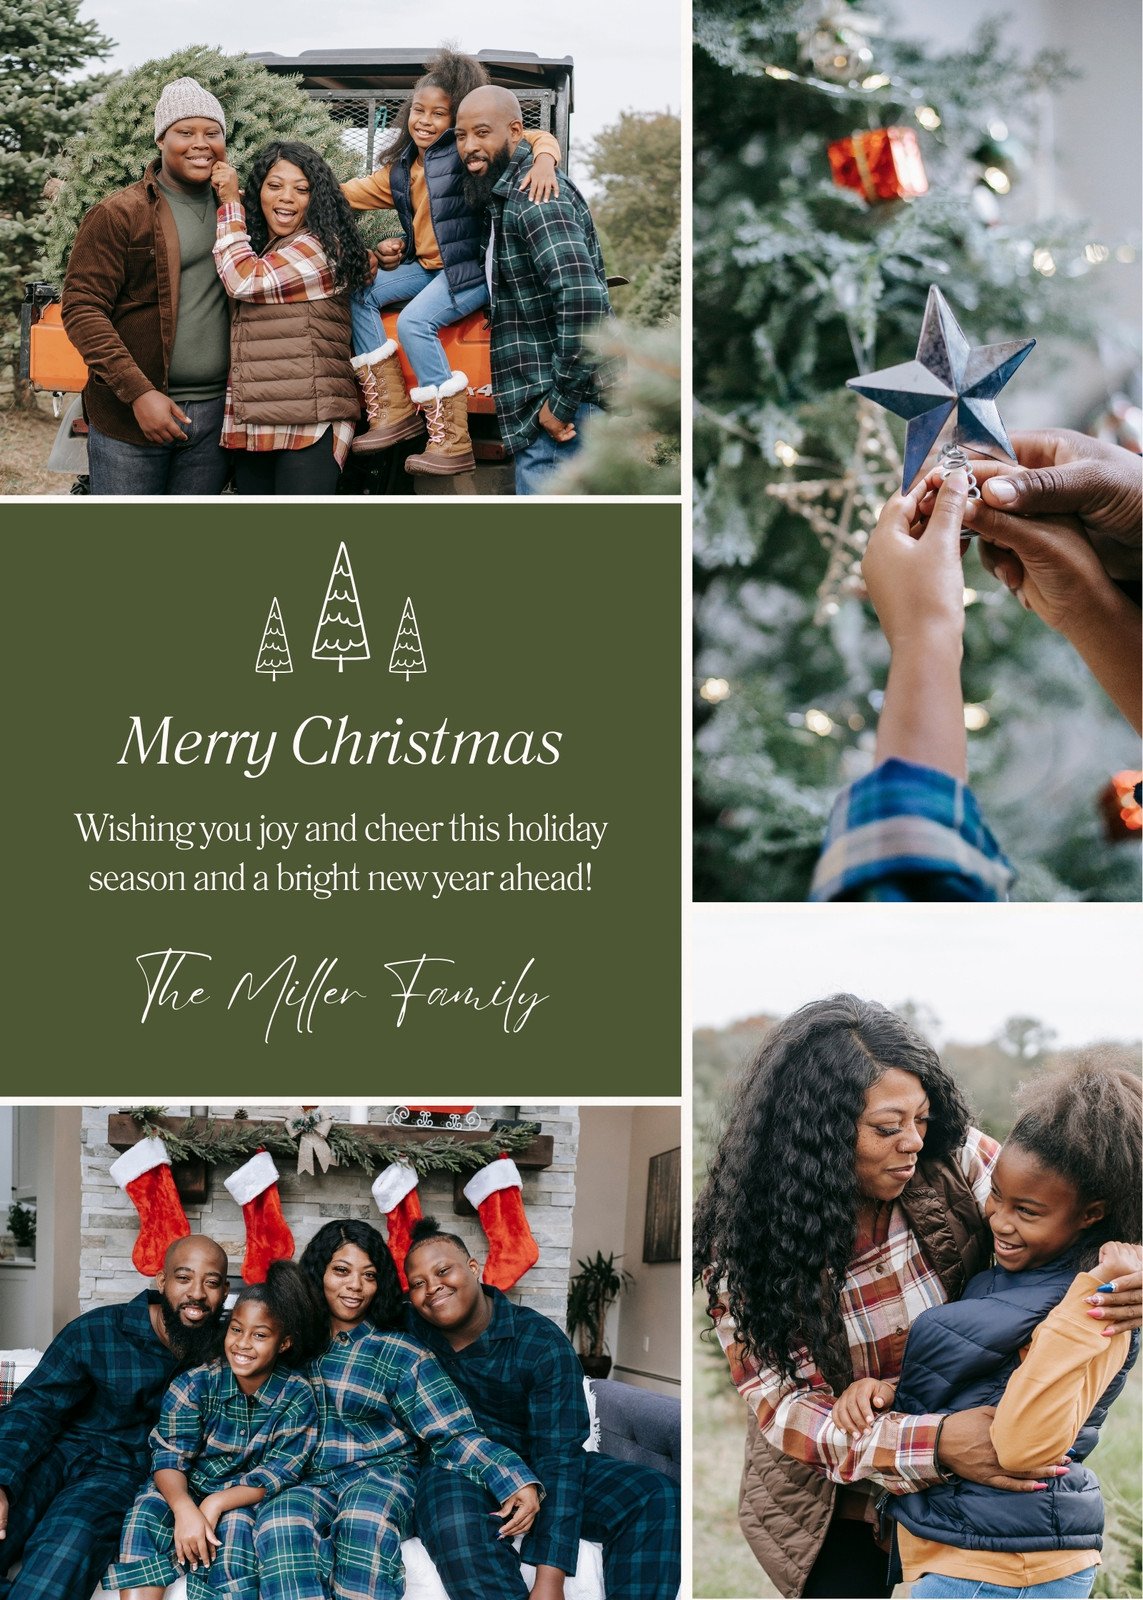 Christmas Greeting Card with Family Photo Collage